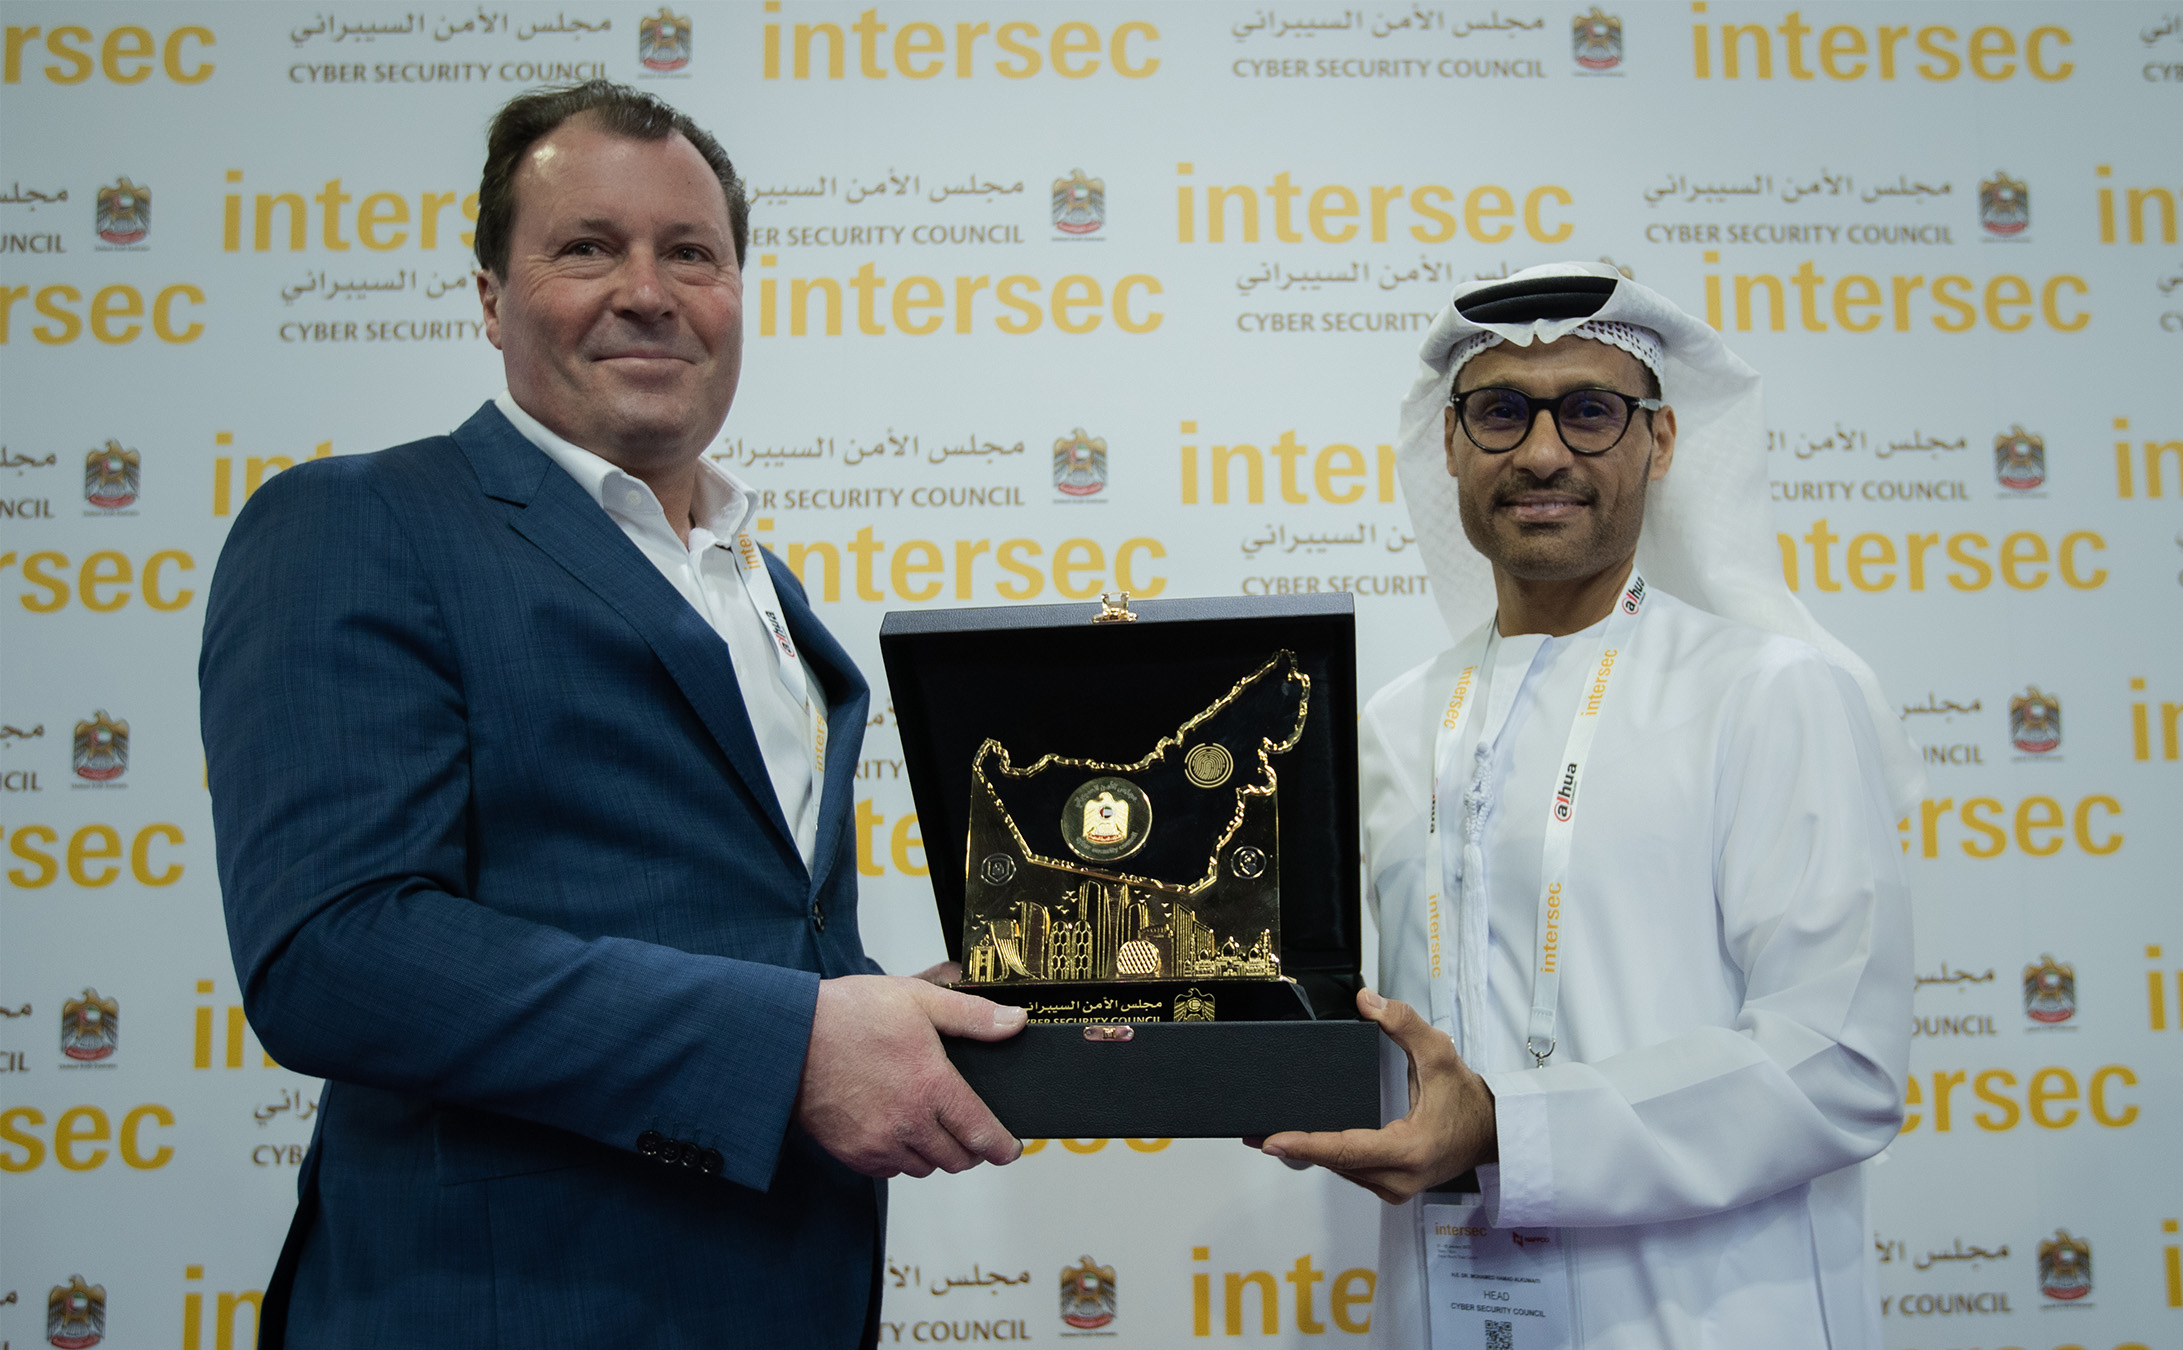 Cyber Security Council at Intersec